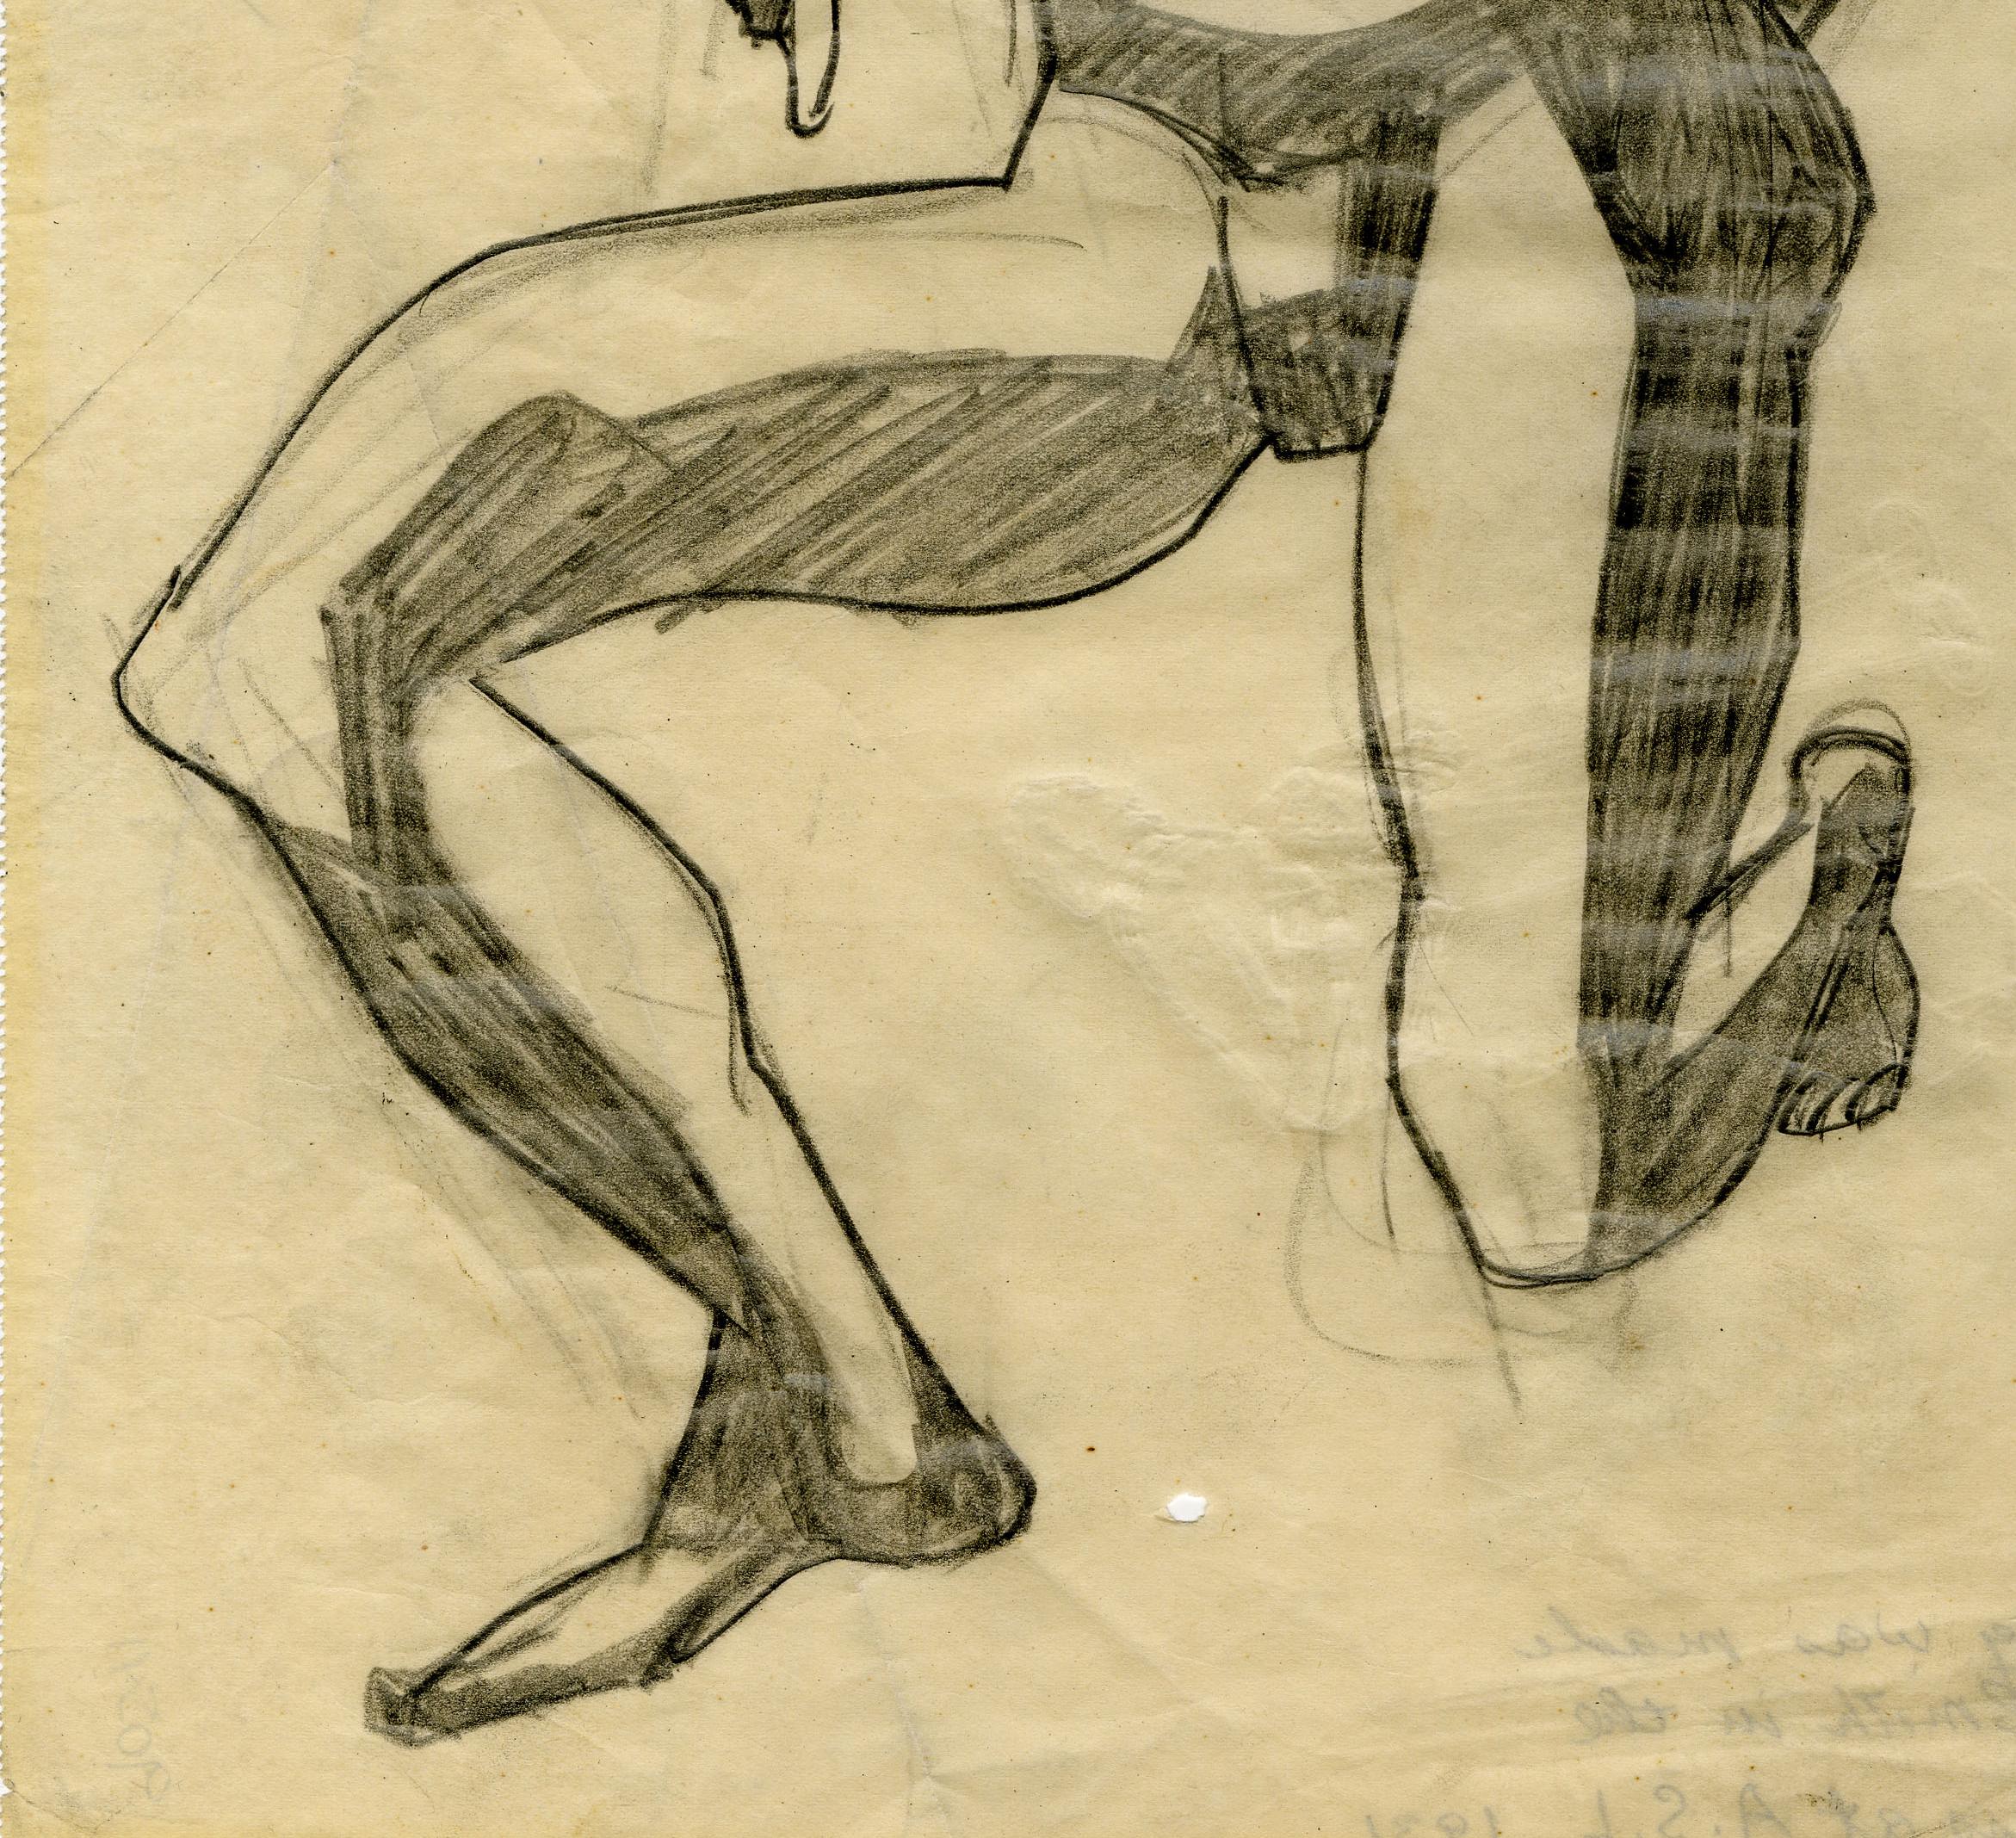 Untitled (Kneeling Male Nude)
Graphite on paper, c. 1930
Unsigned
Annotated in pencil verso:
